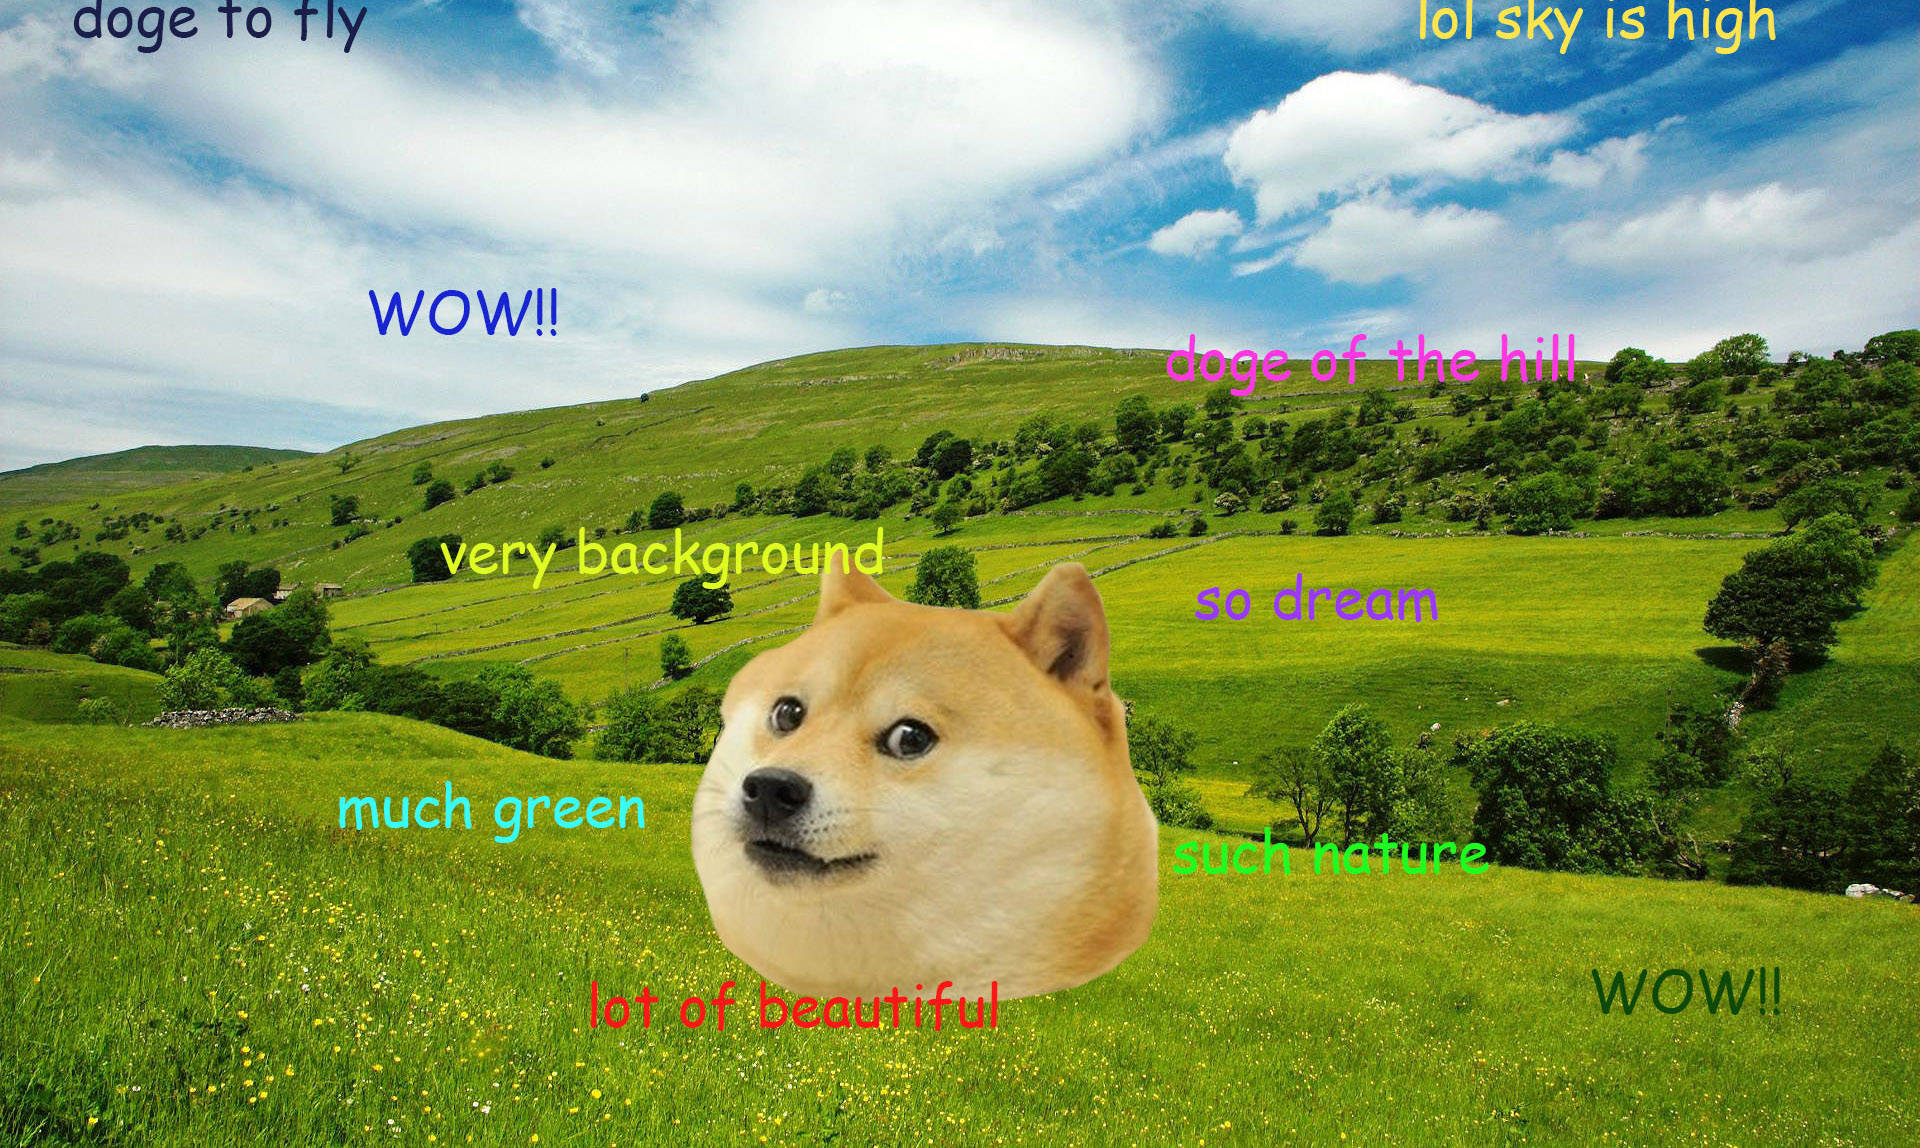 Doge Meme with serious expression and words around natural background wallpaper.